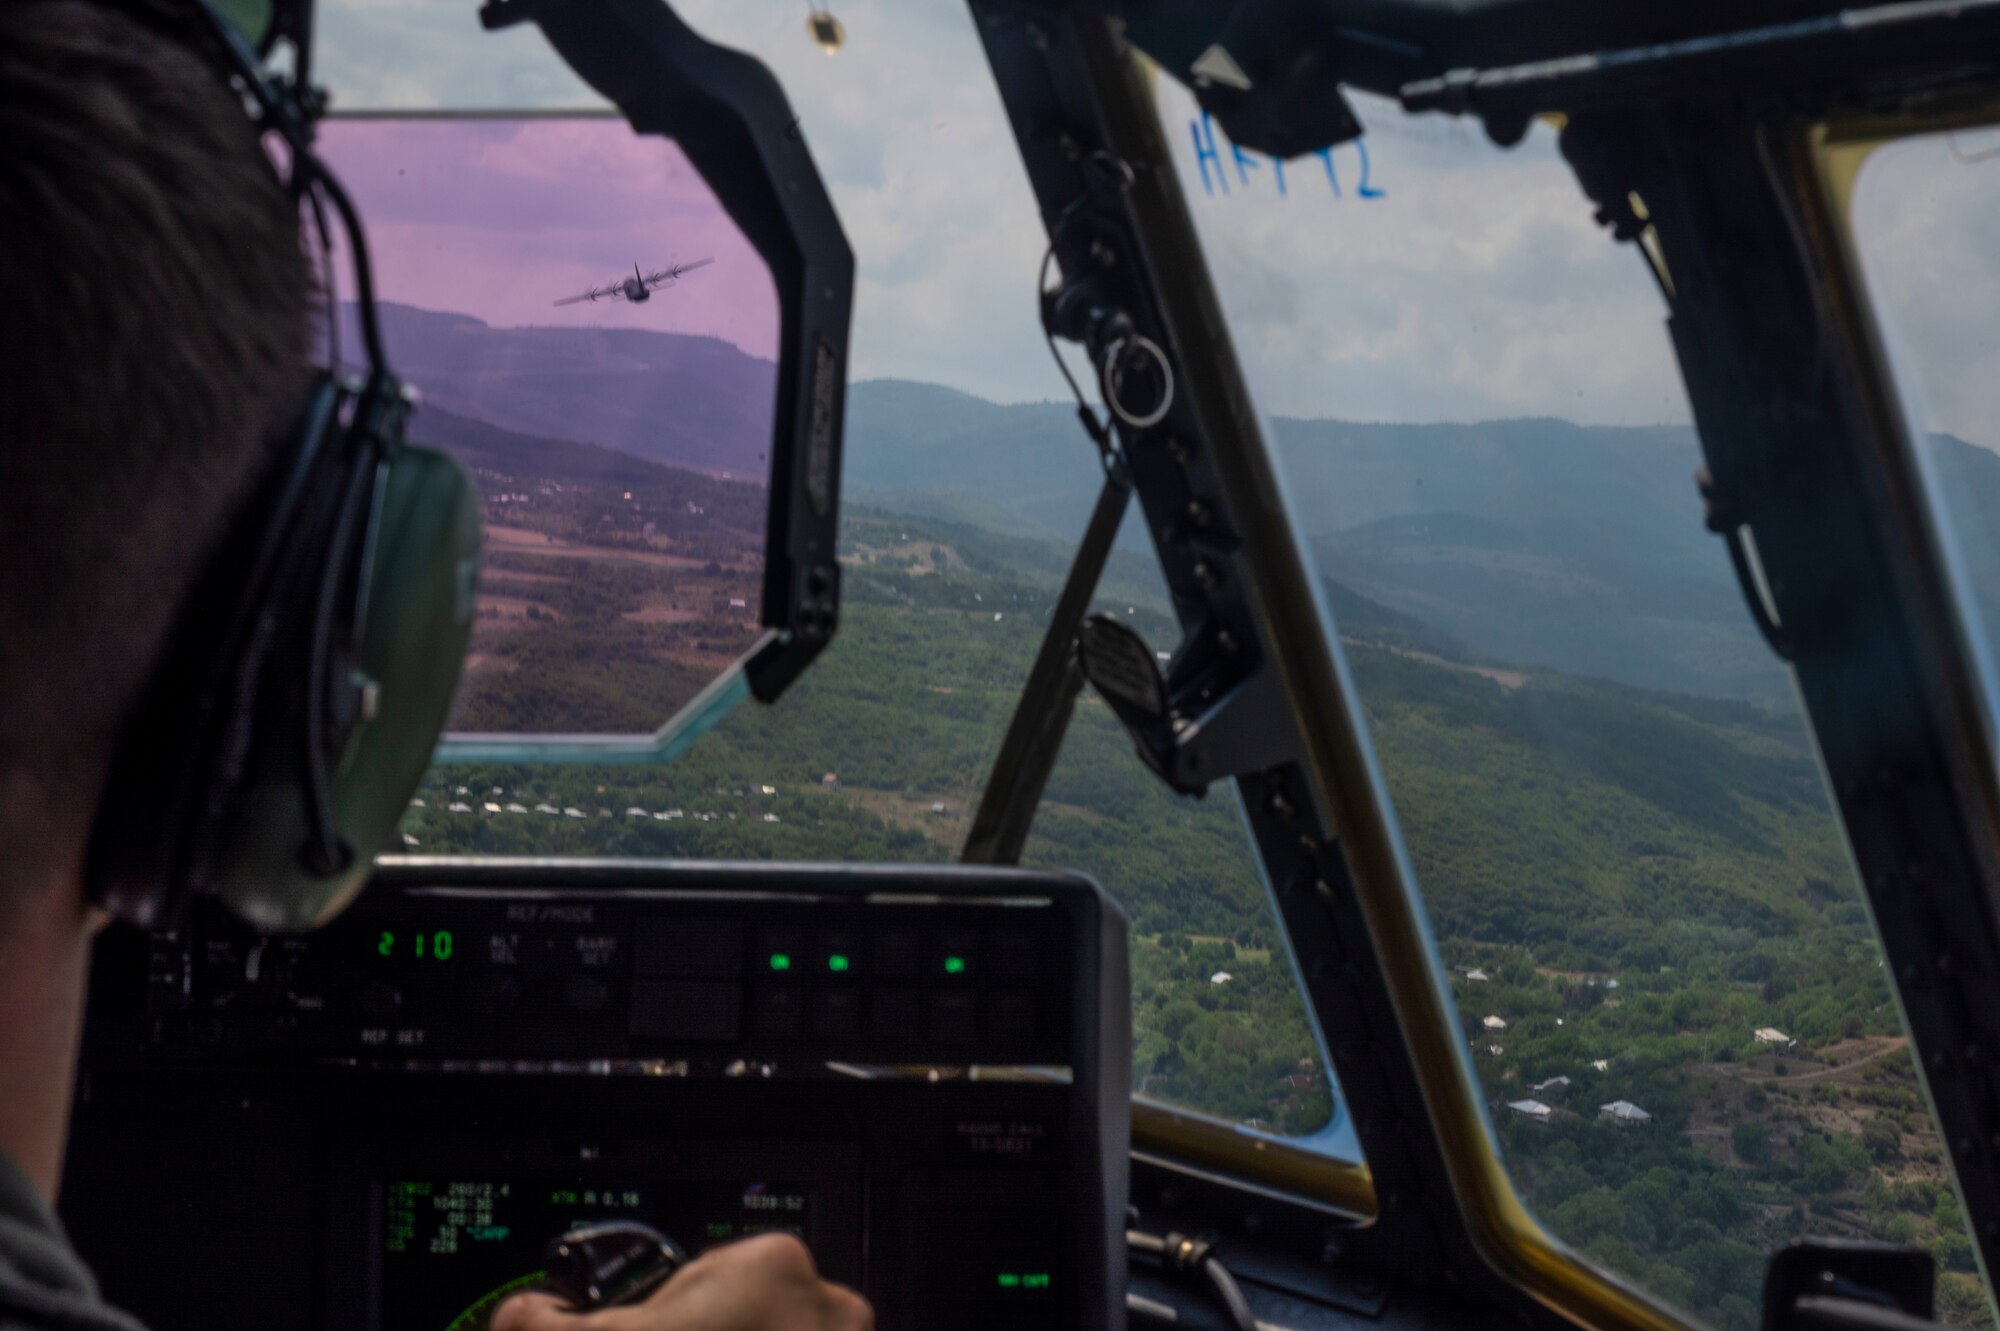 U.S. Air Force Lt. Col. Beau Tresemer, 37th Airlift Squadron commander, flies a C-130J Super Hercules across the skies of Georgia during exercise Agile Spirit 21